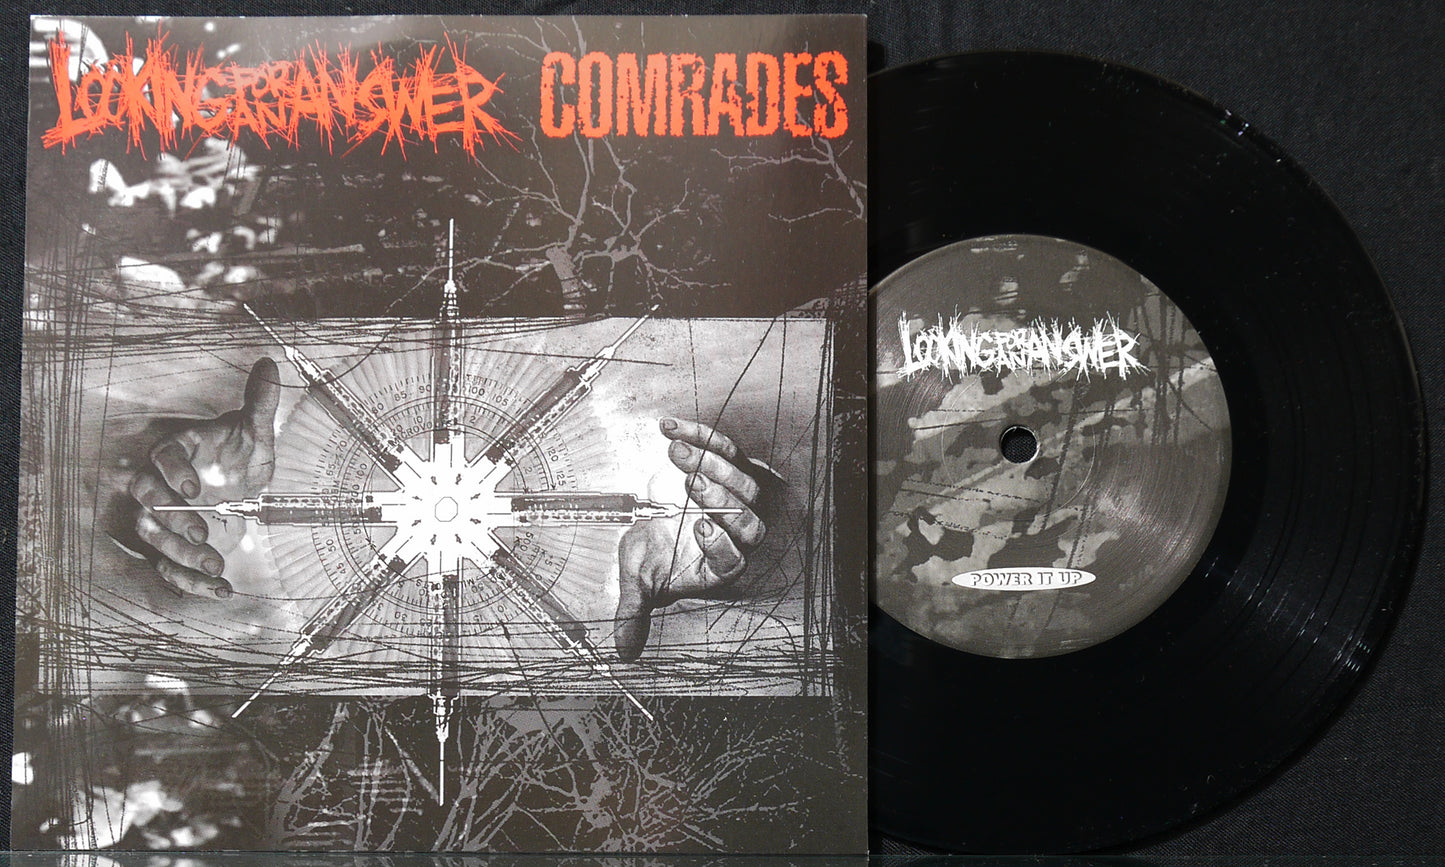 LOOKING FOR AN ANSWER / COMRADES - Split 7"